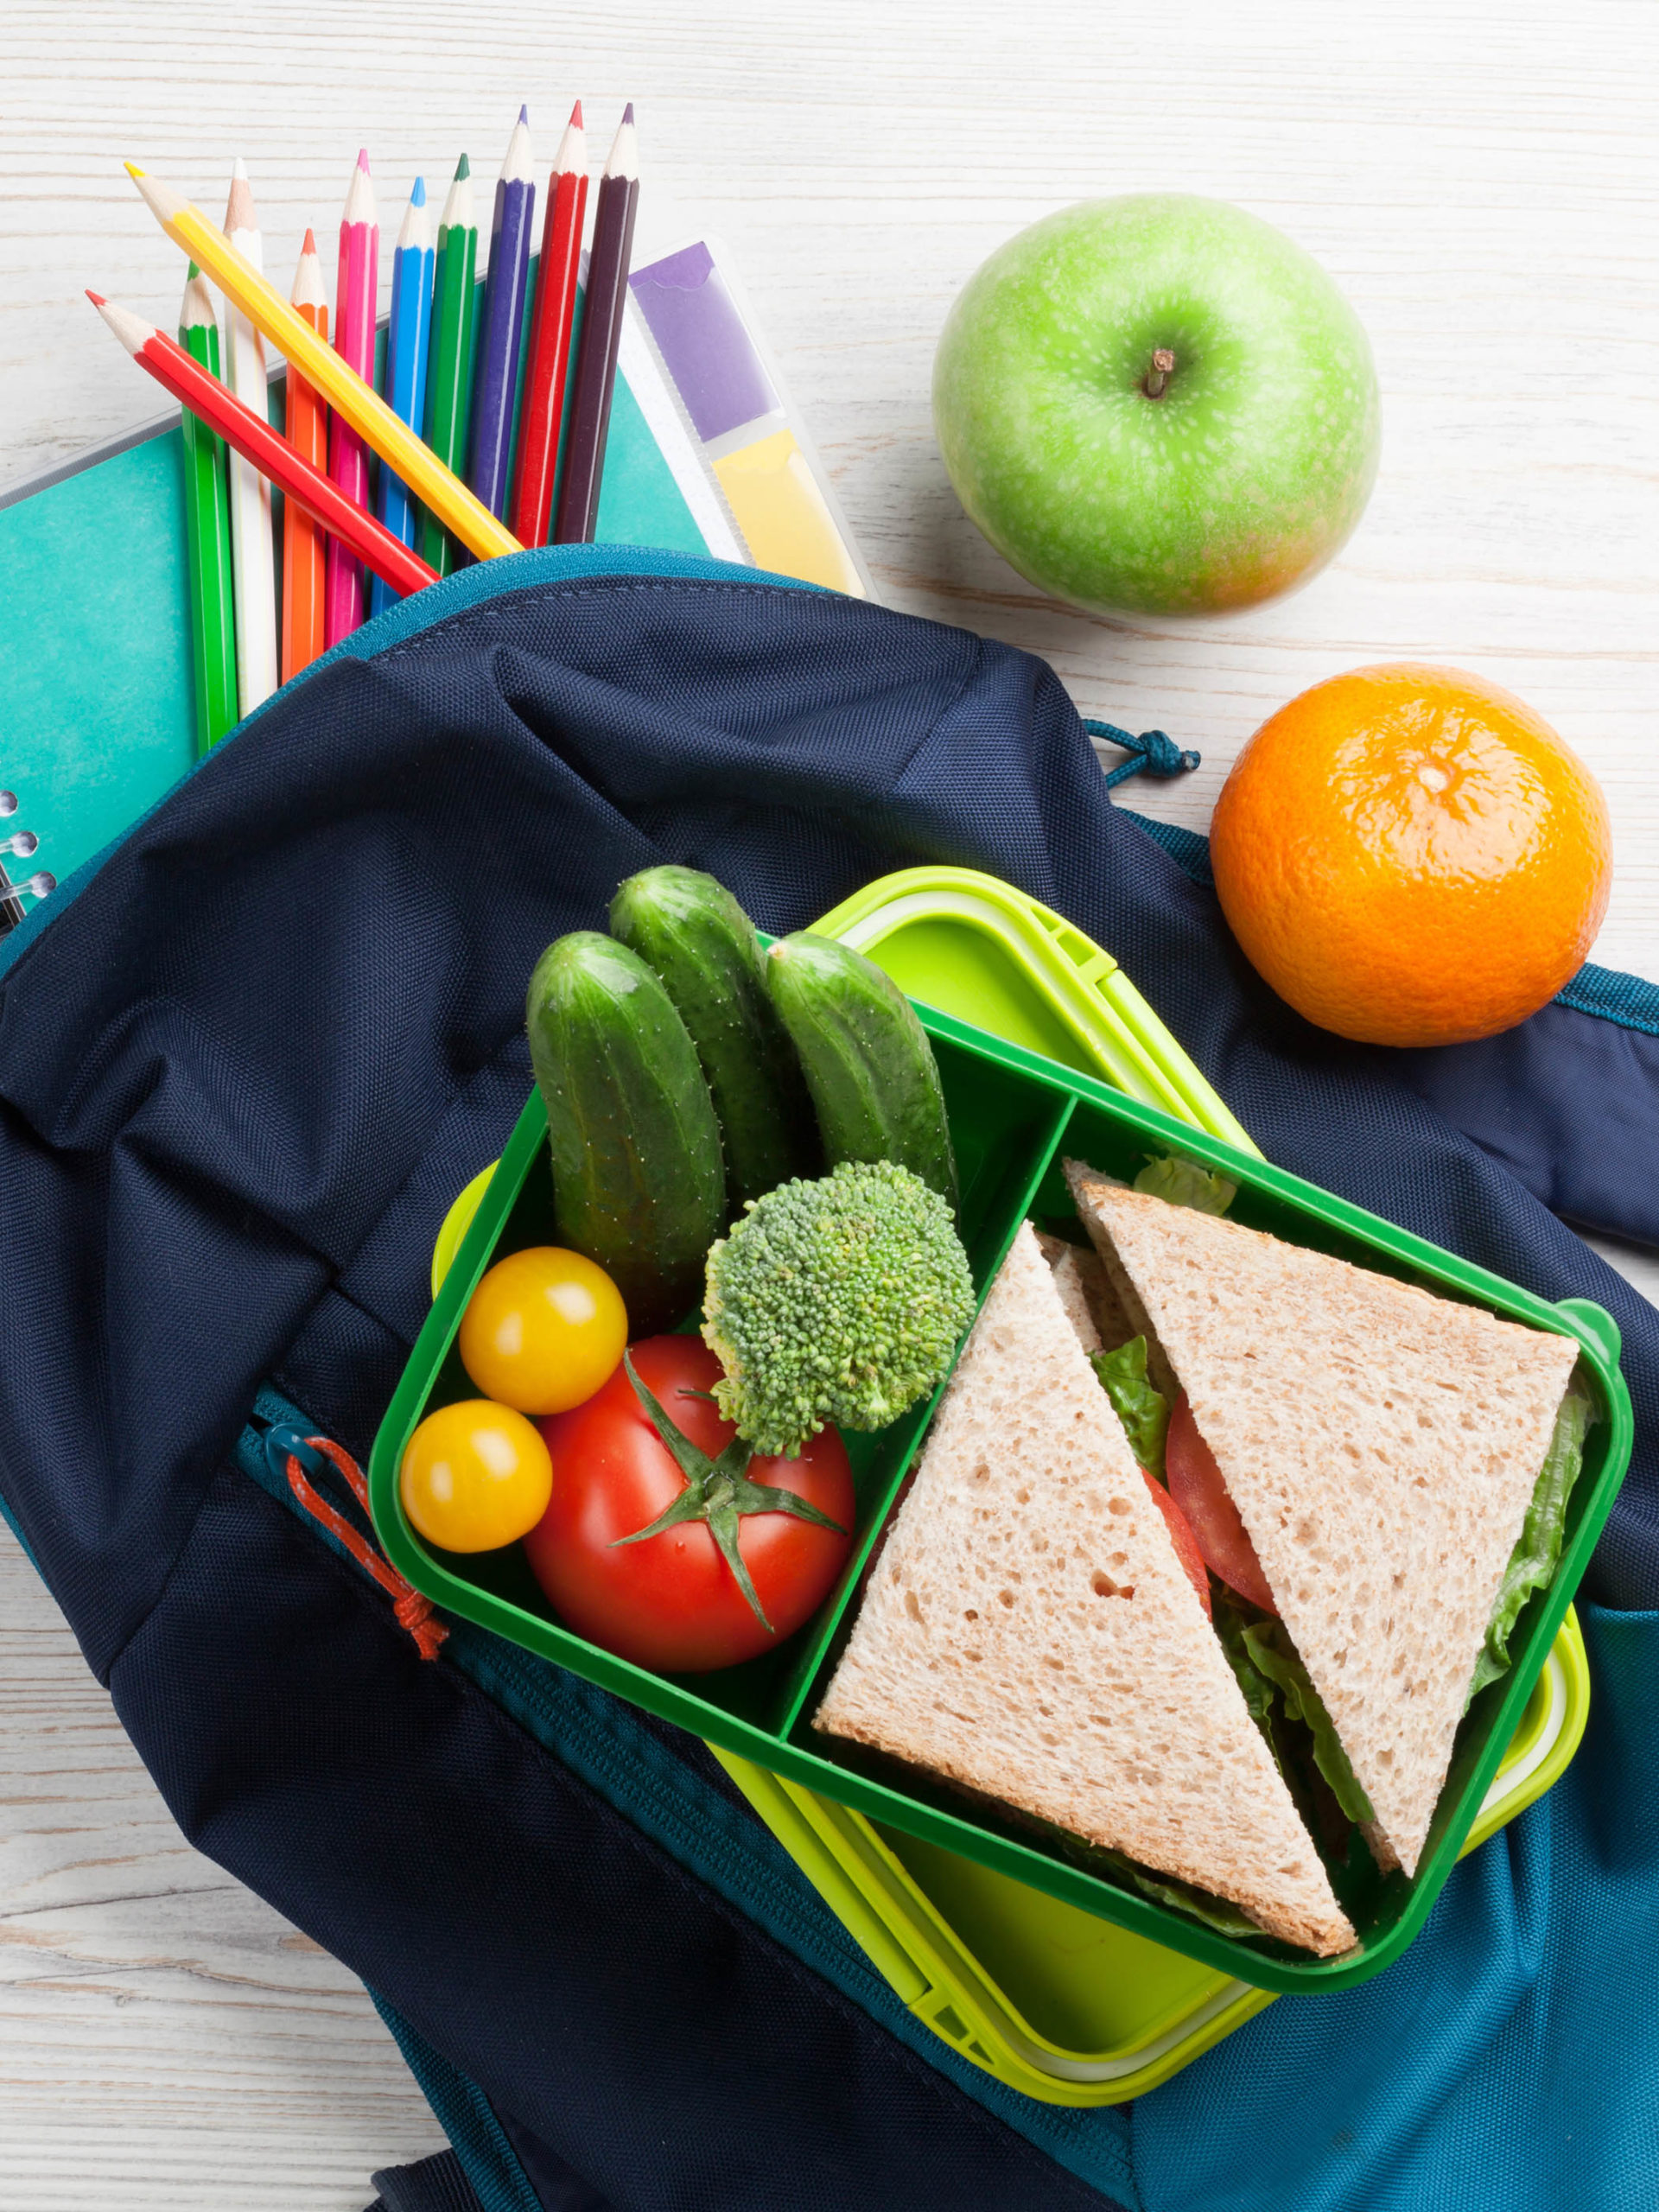 Lunch box with vegetables and sandwich on wooden table